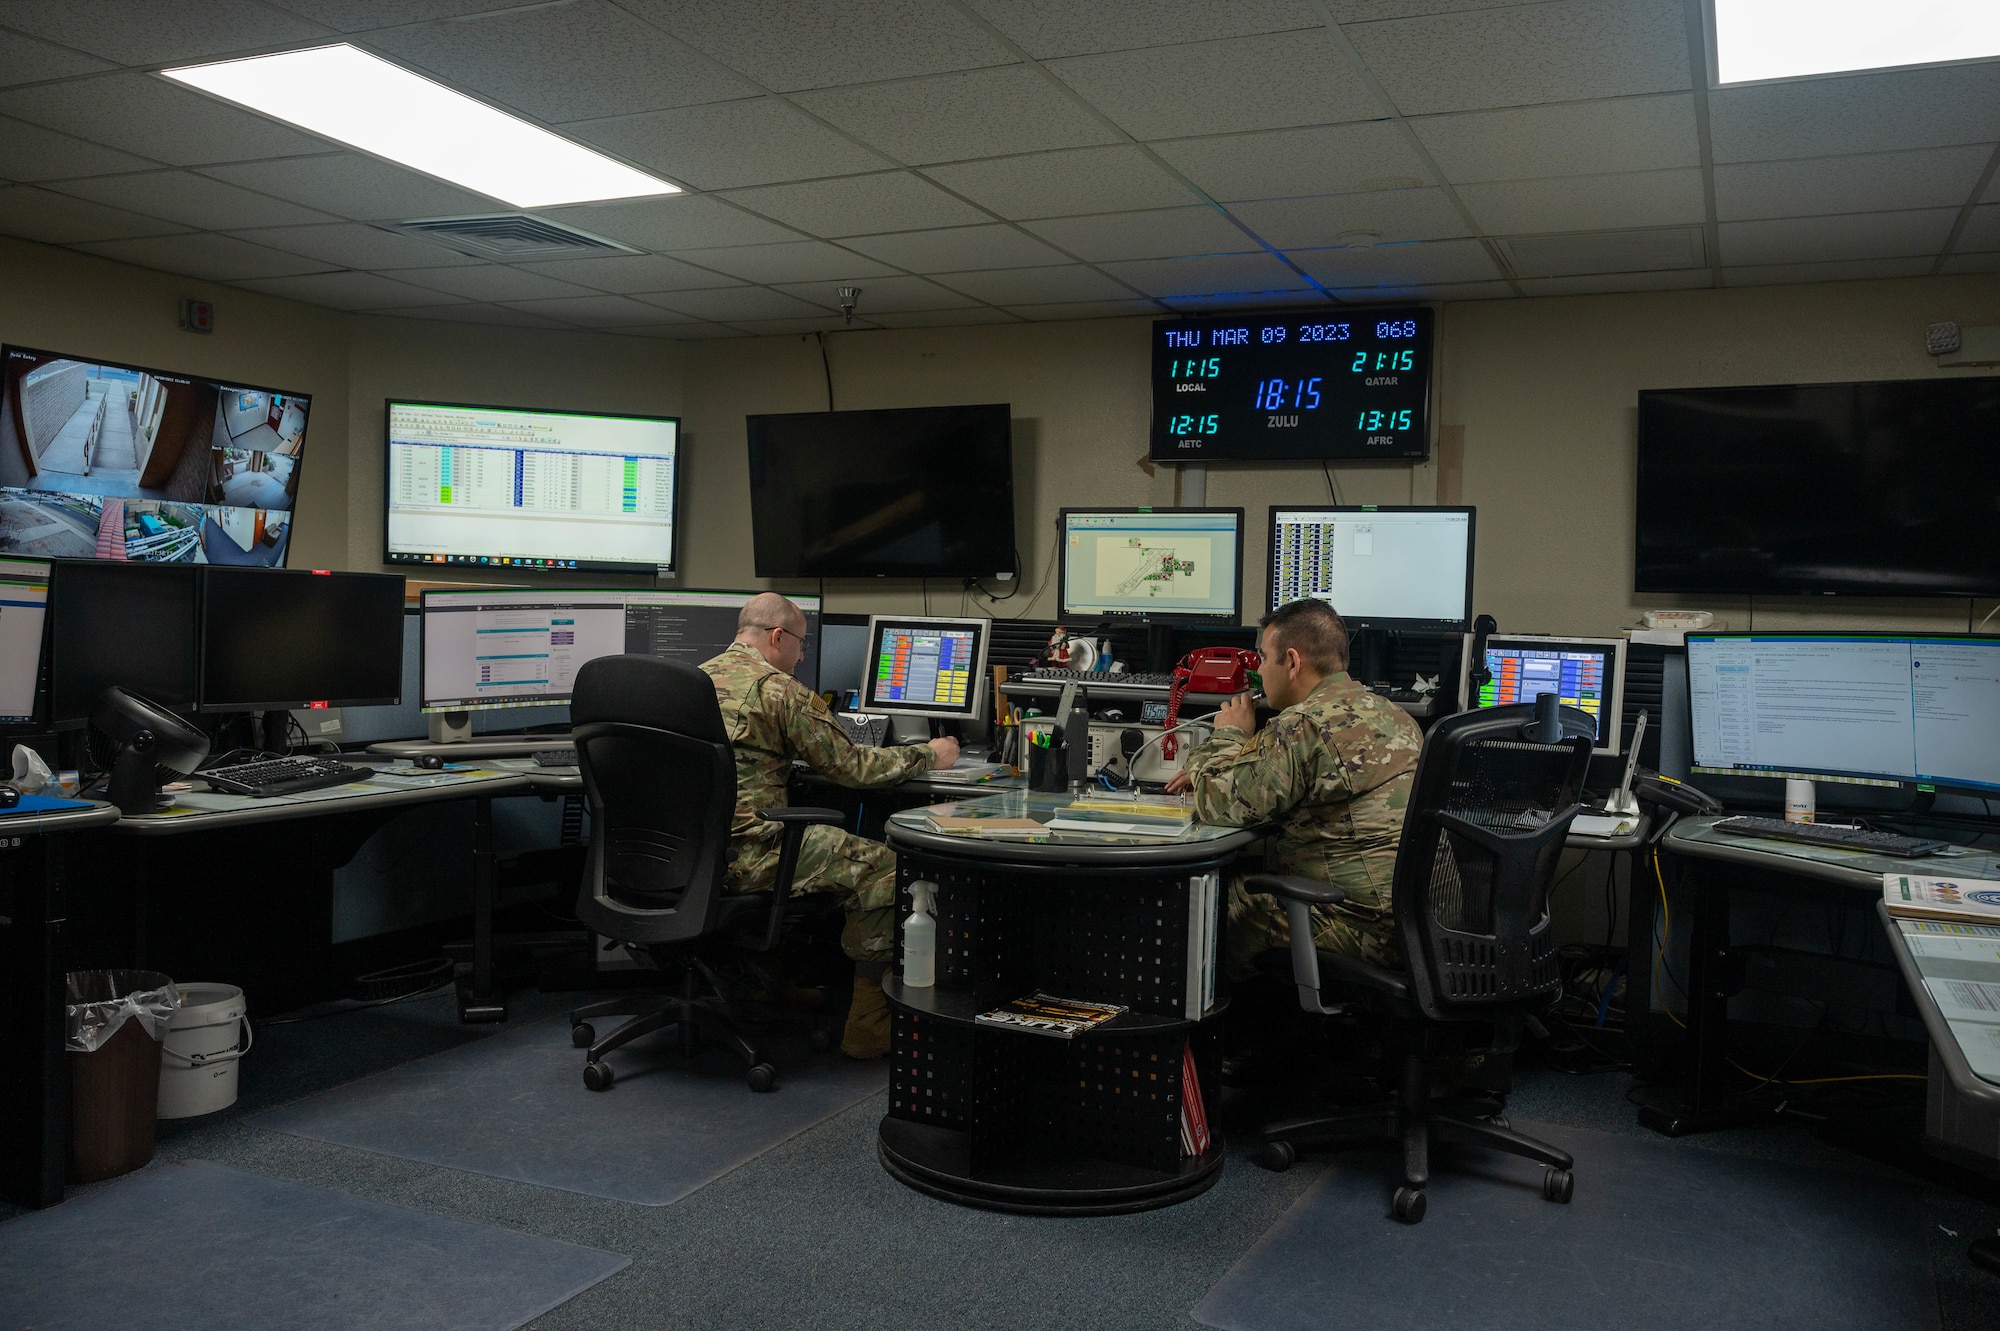 U.S. Air Force Tech. Sgt. Miguel Rodriguez, 56th Fighter Wing Command Post systems non-commissioned officer in charge, and Tech Sgt. Robert Silverman, 56th FW Command Post operations NCOIC, monitor various information sources, March 9, 2023, at Luke Air Force Base, Arizona.